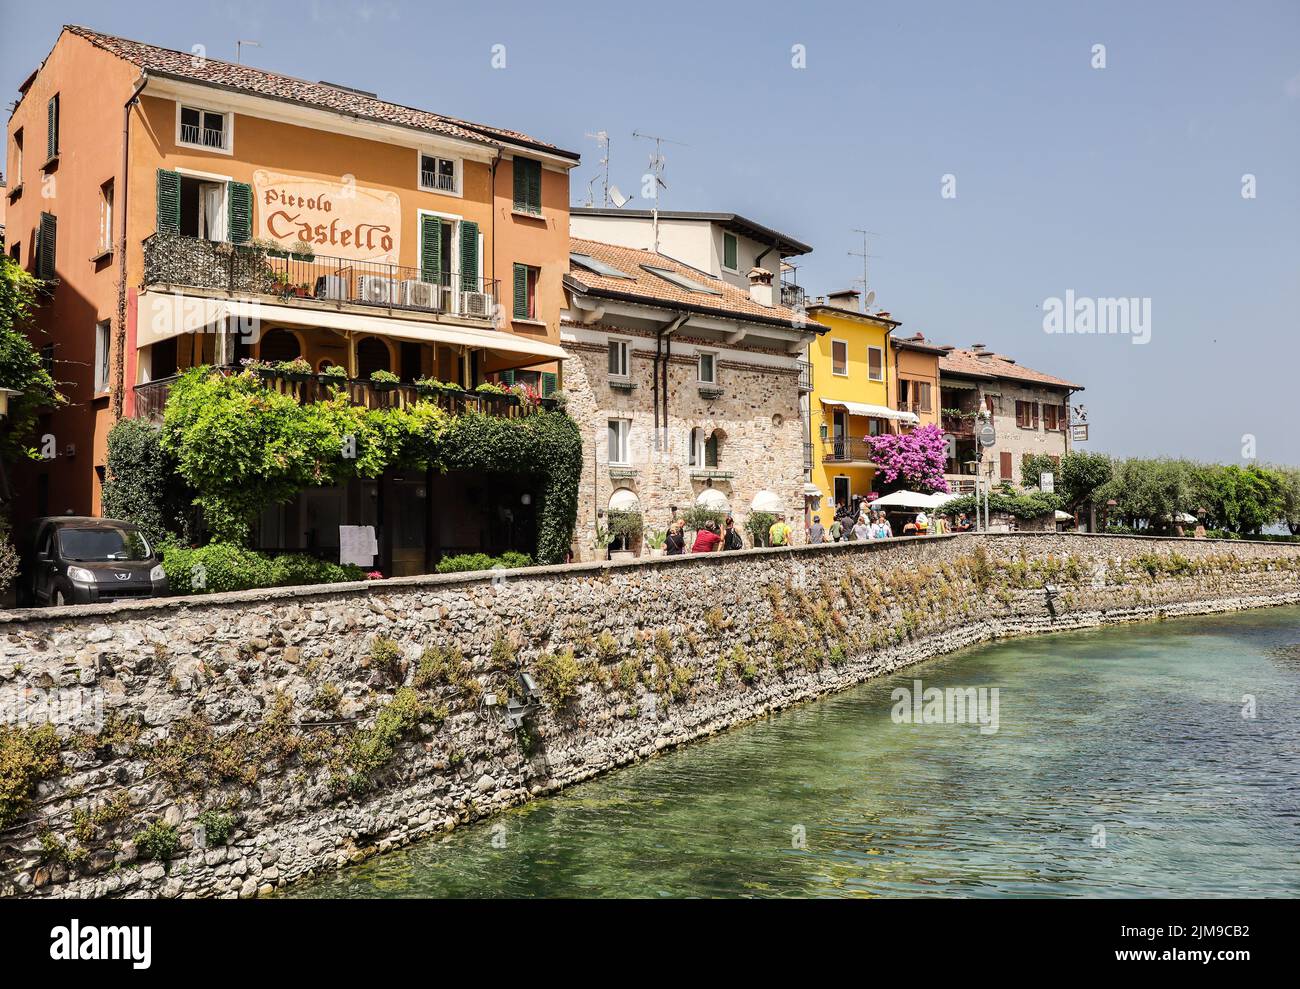 Sirmione, Italy - June 25, 2022: Picturesque Town Sirmione with Colorful Houses in Northern Italy. Beautiful City Architecture with Water Channel. Stock Photo